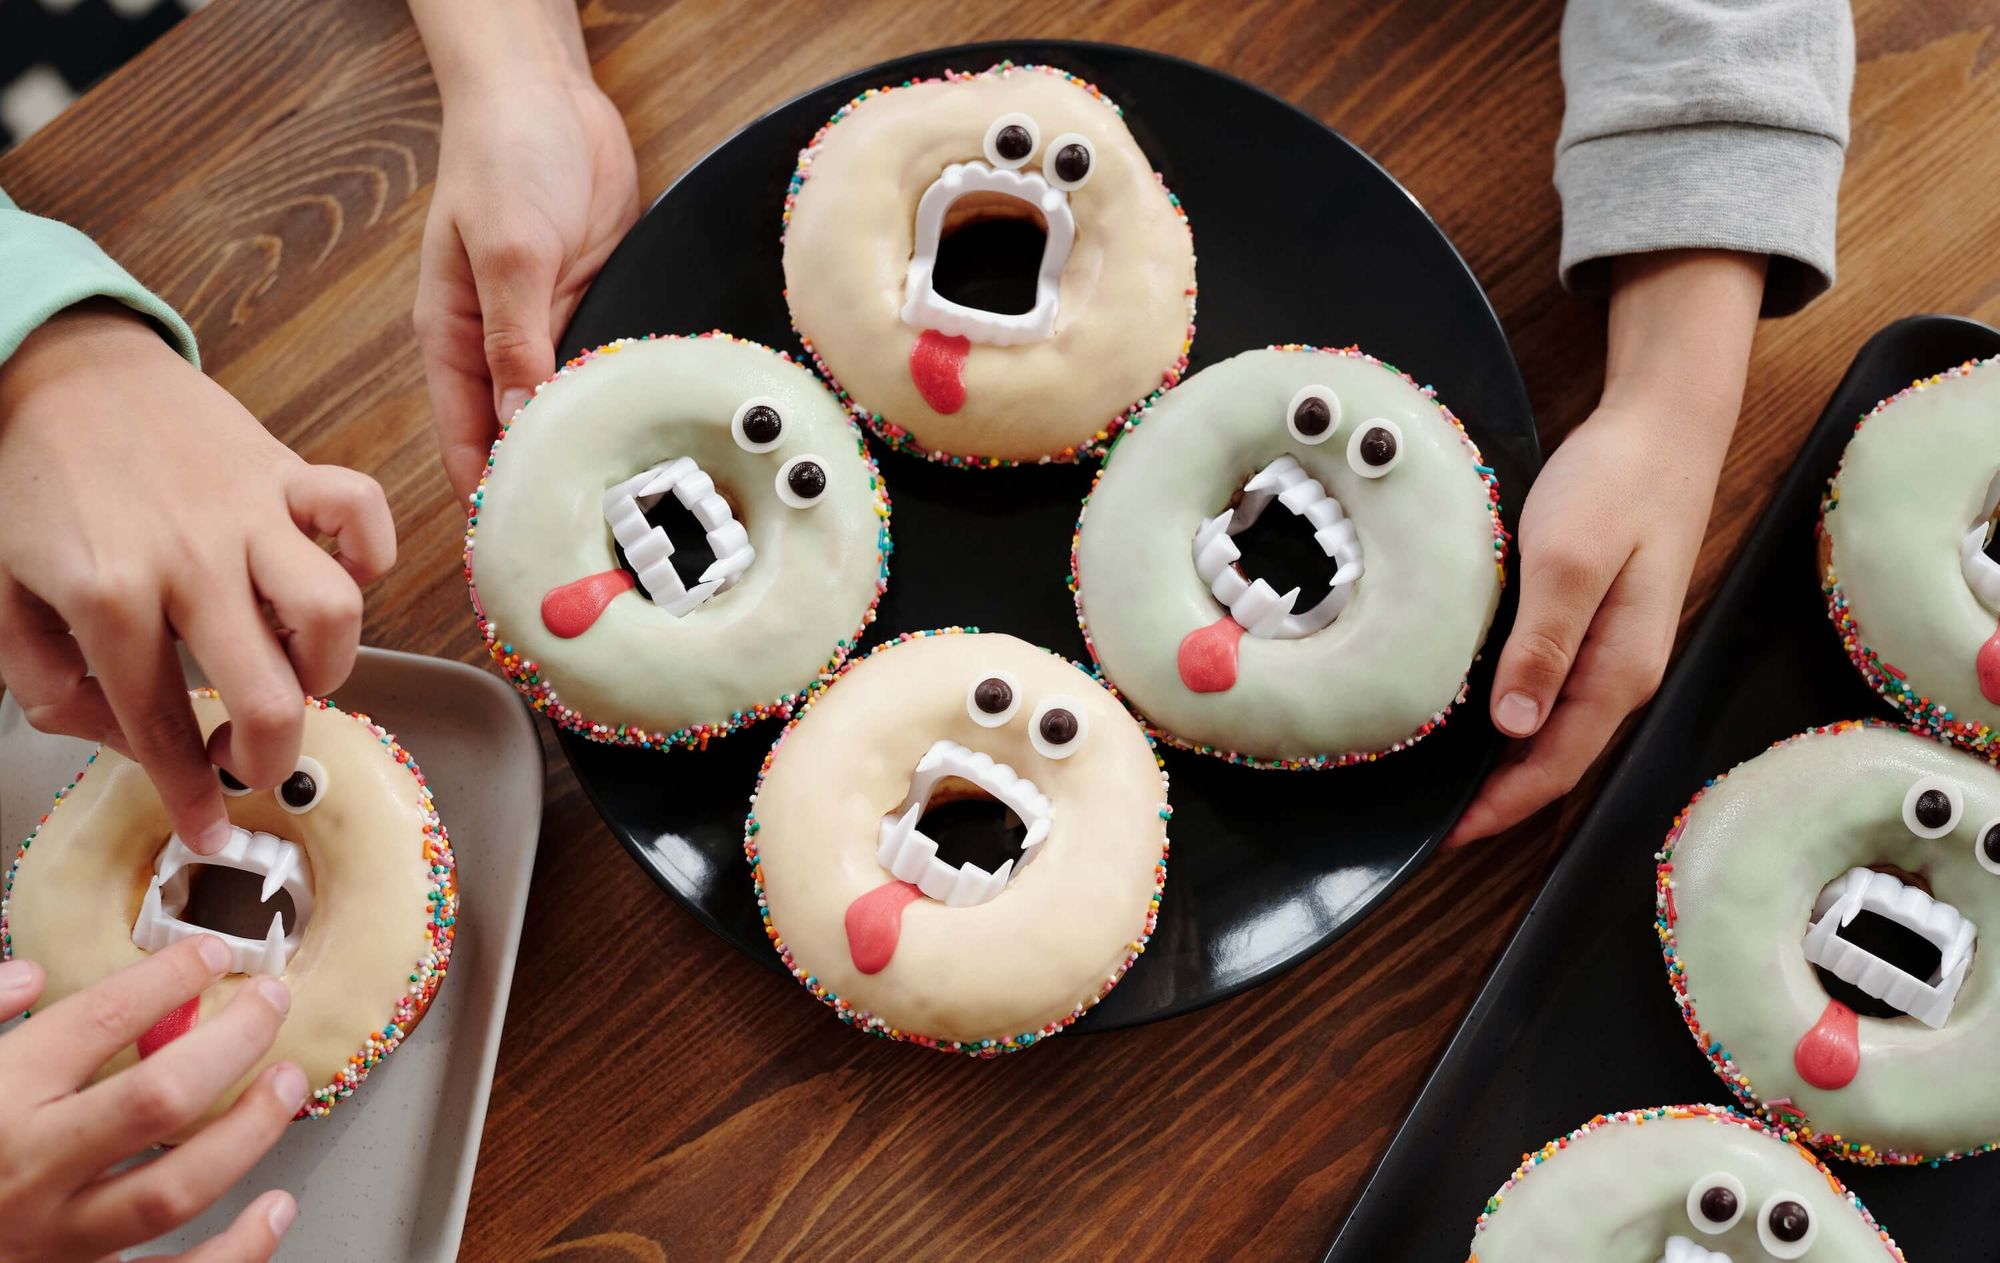 Close up of plates of Halloween-themed doughnuts with false vampire teeth being prepared by children's hands.